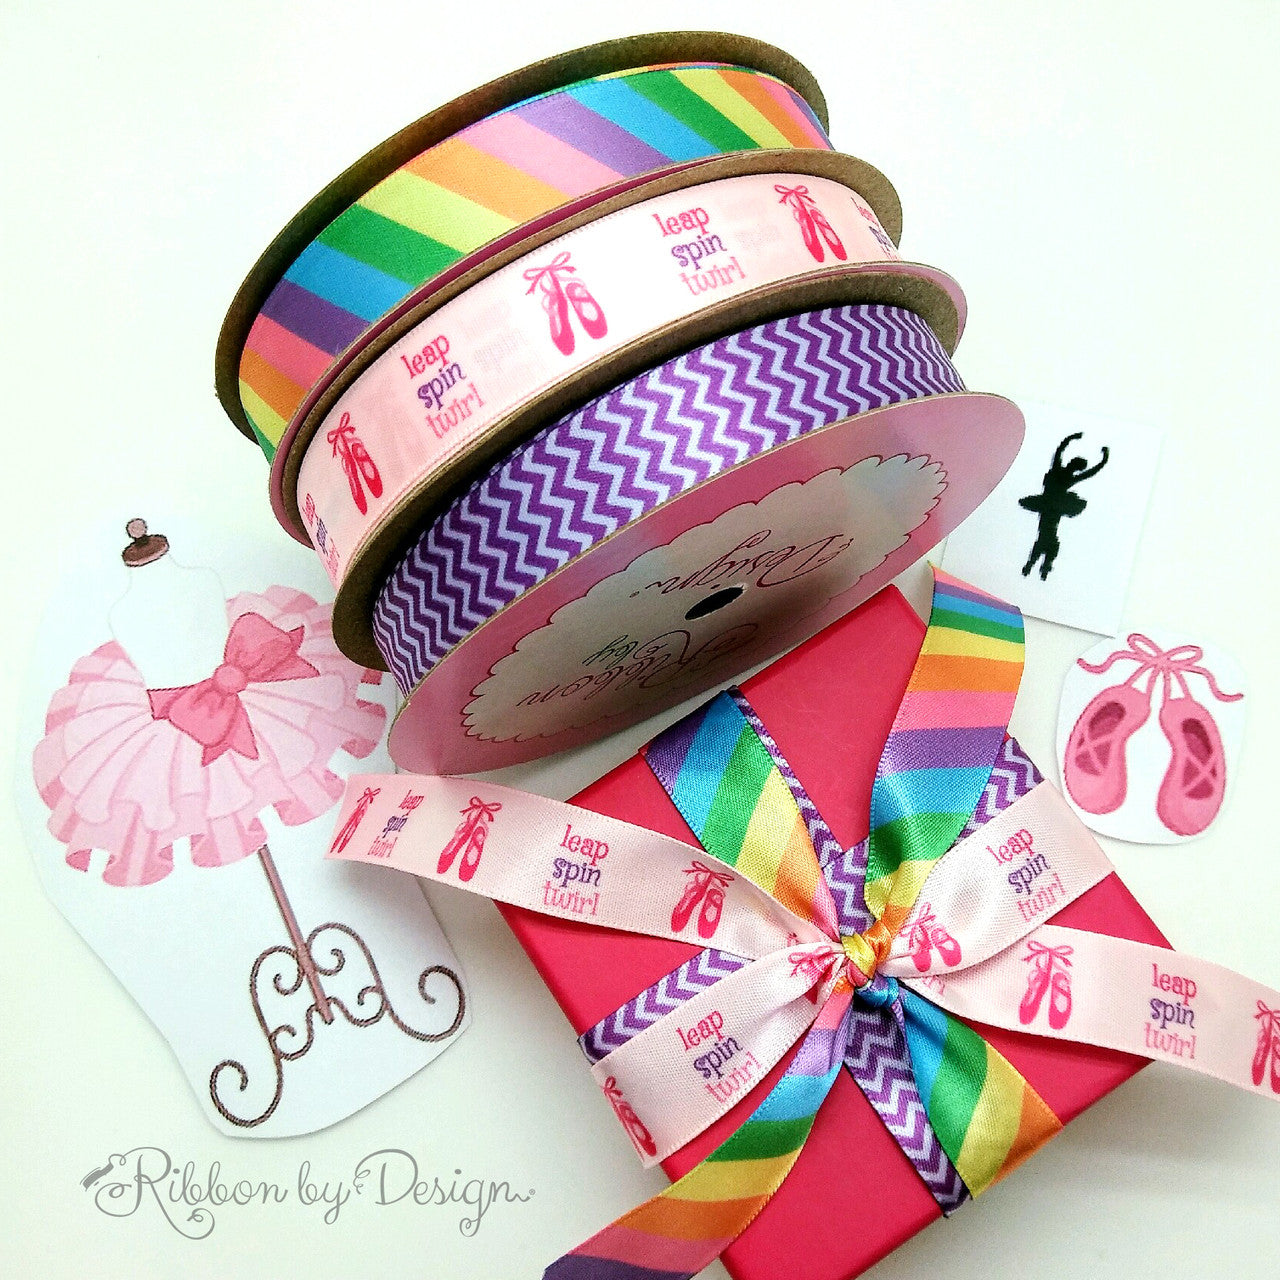 Mix and Match our chevron and pastel rainbow ribbons for your little dancer's special recital!